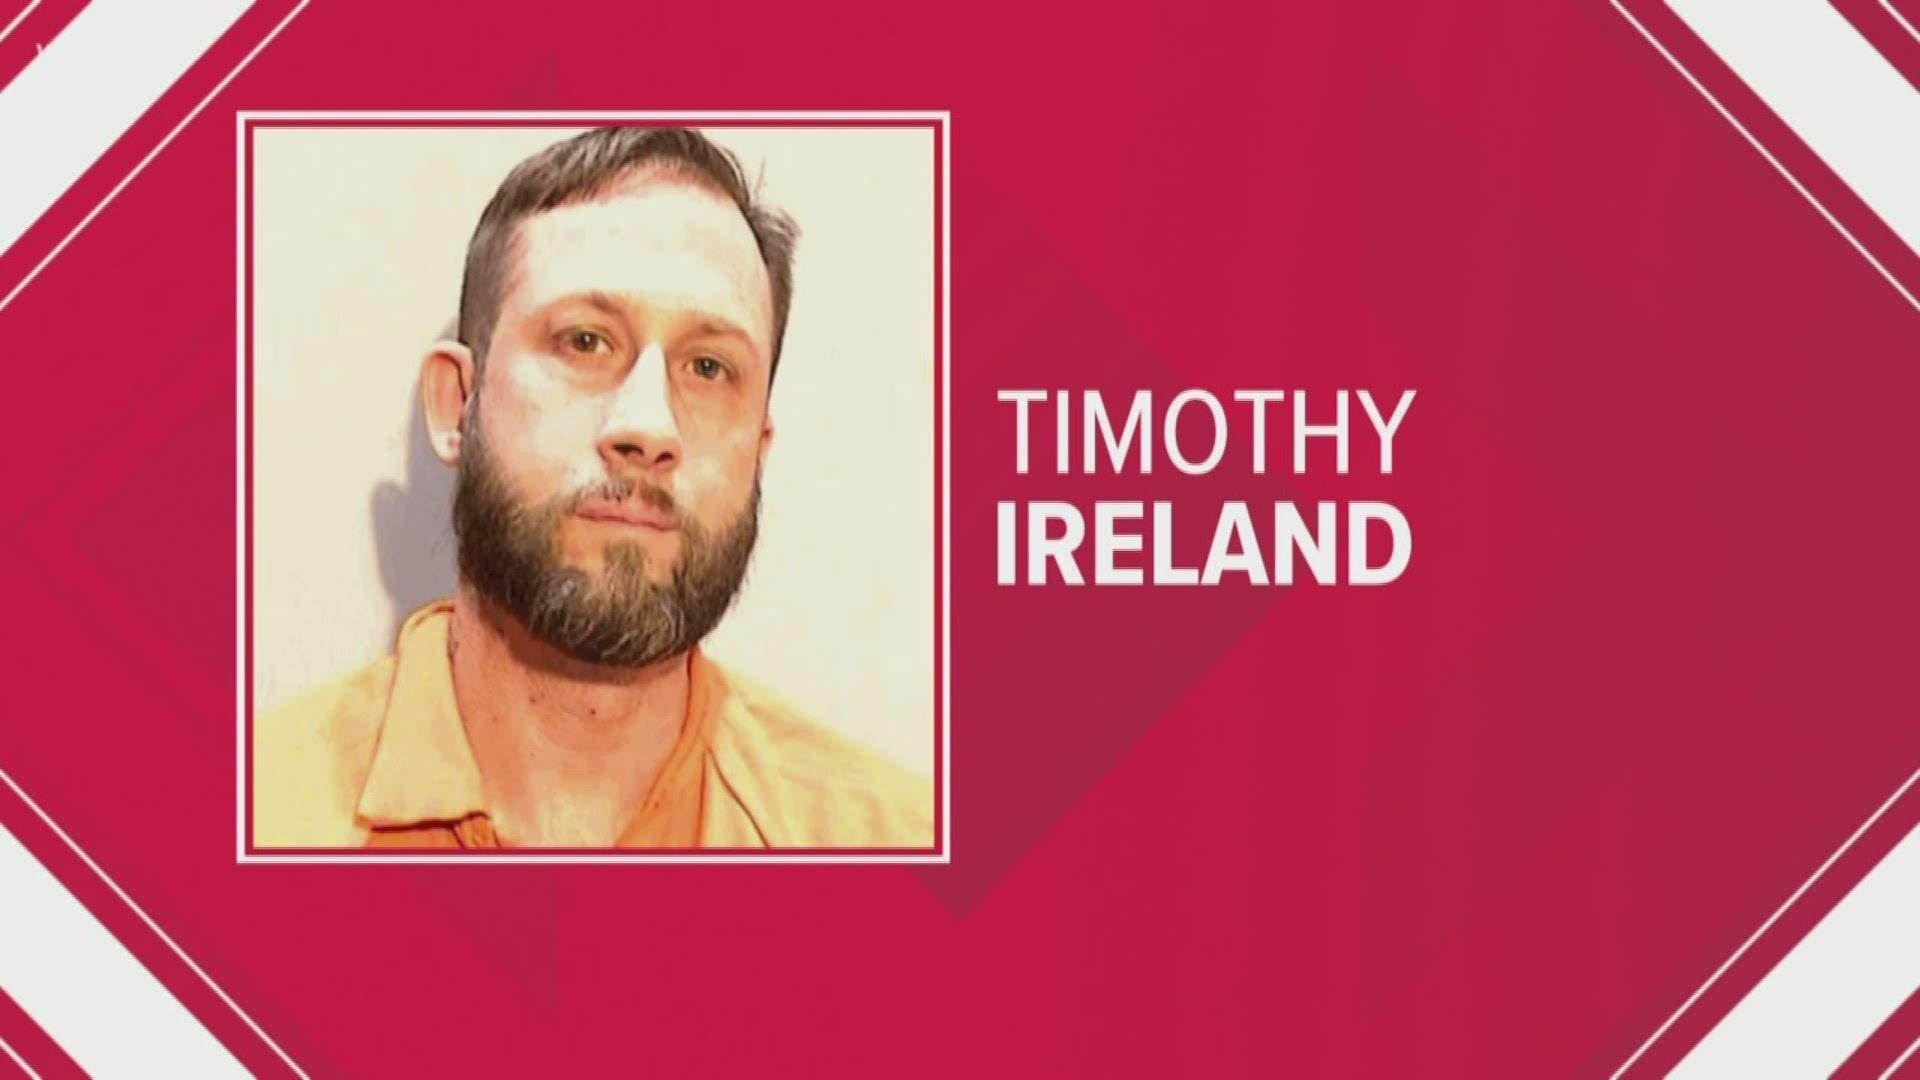 Timothy Ireland was arrested in August after Capitol Police received a tip that he made a Facebook post saying she 'should be shot.'